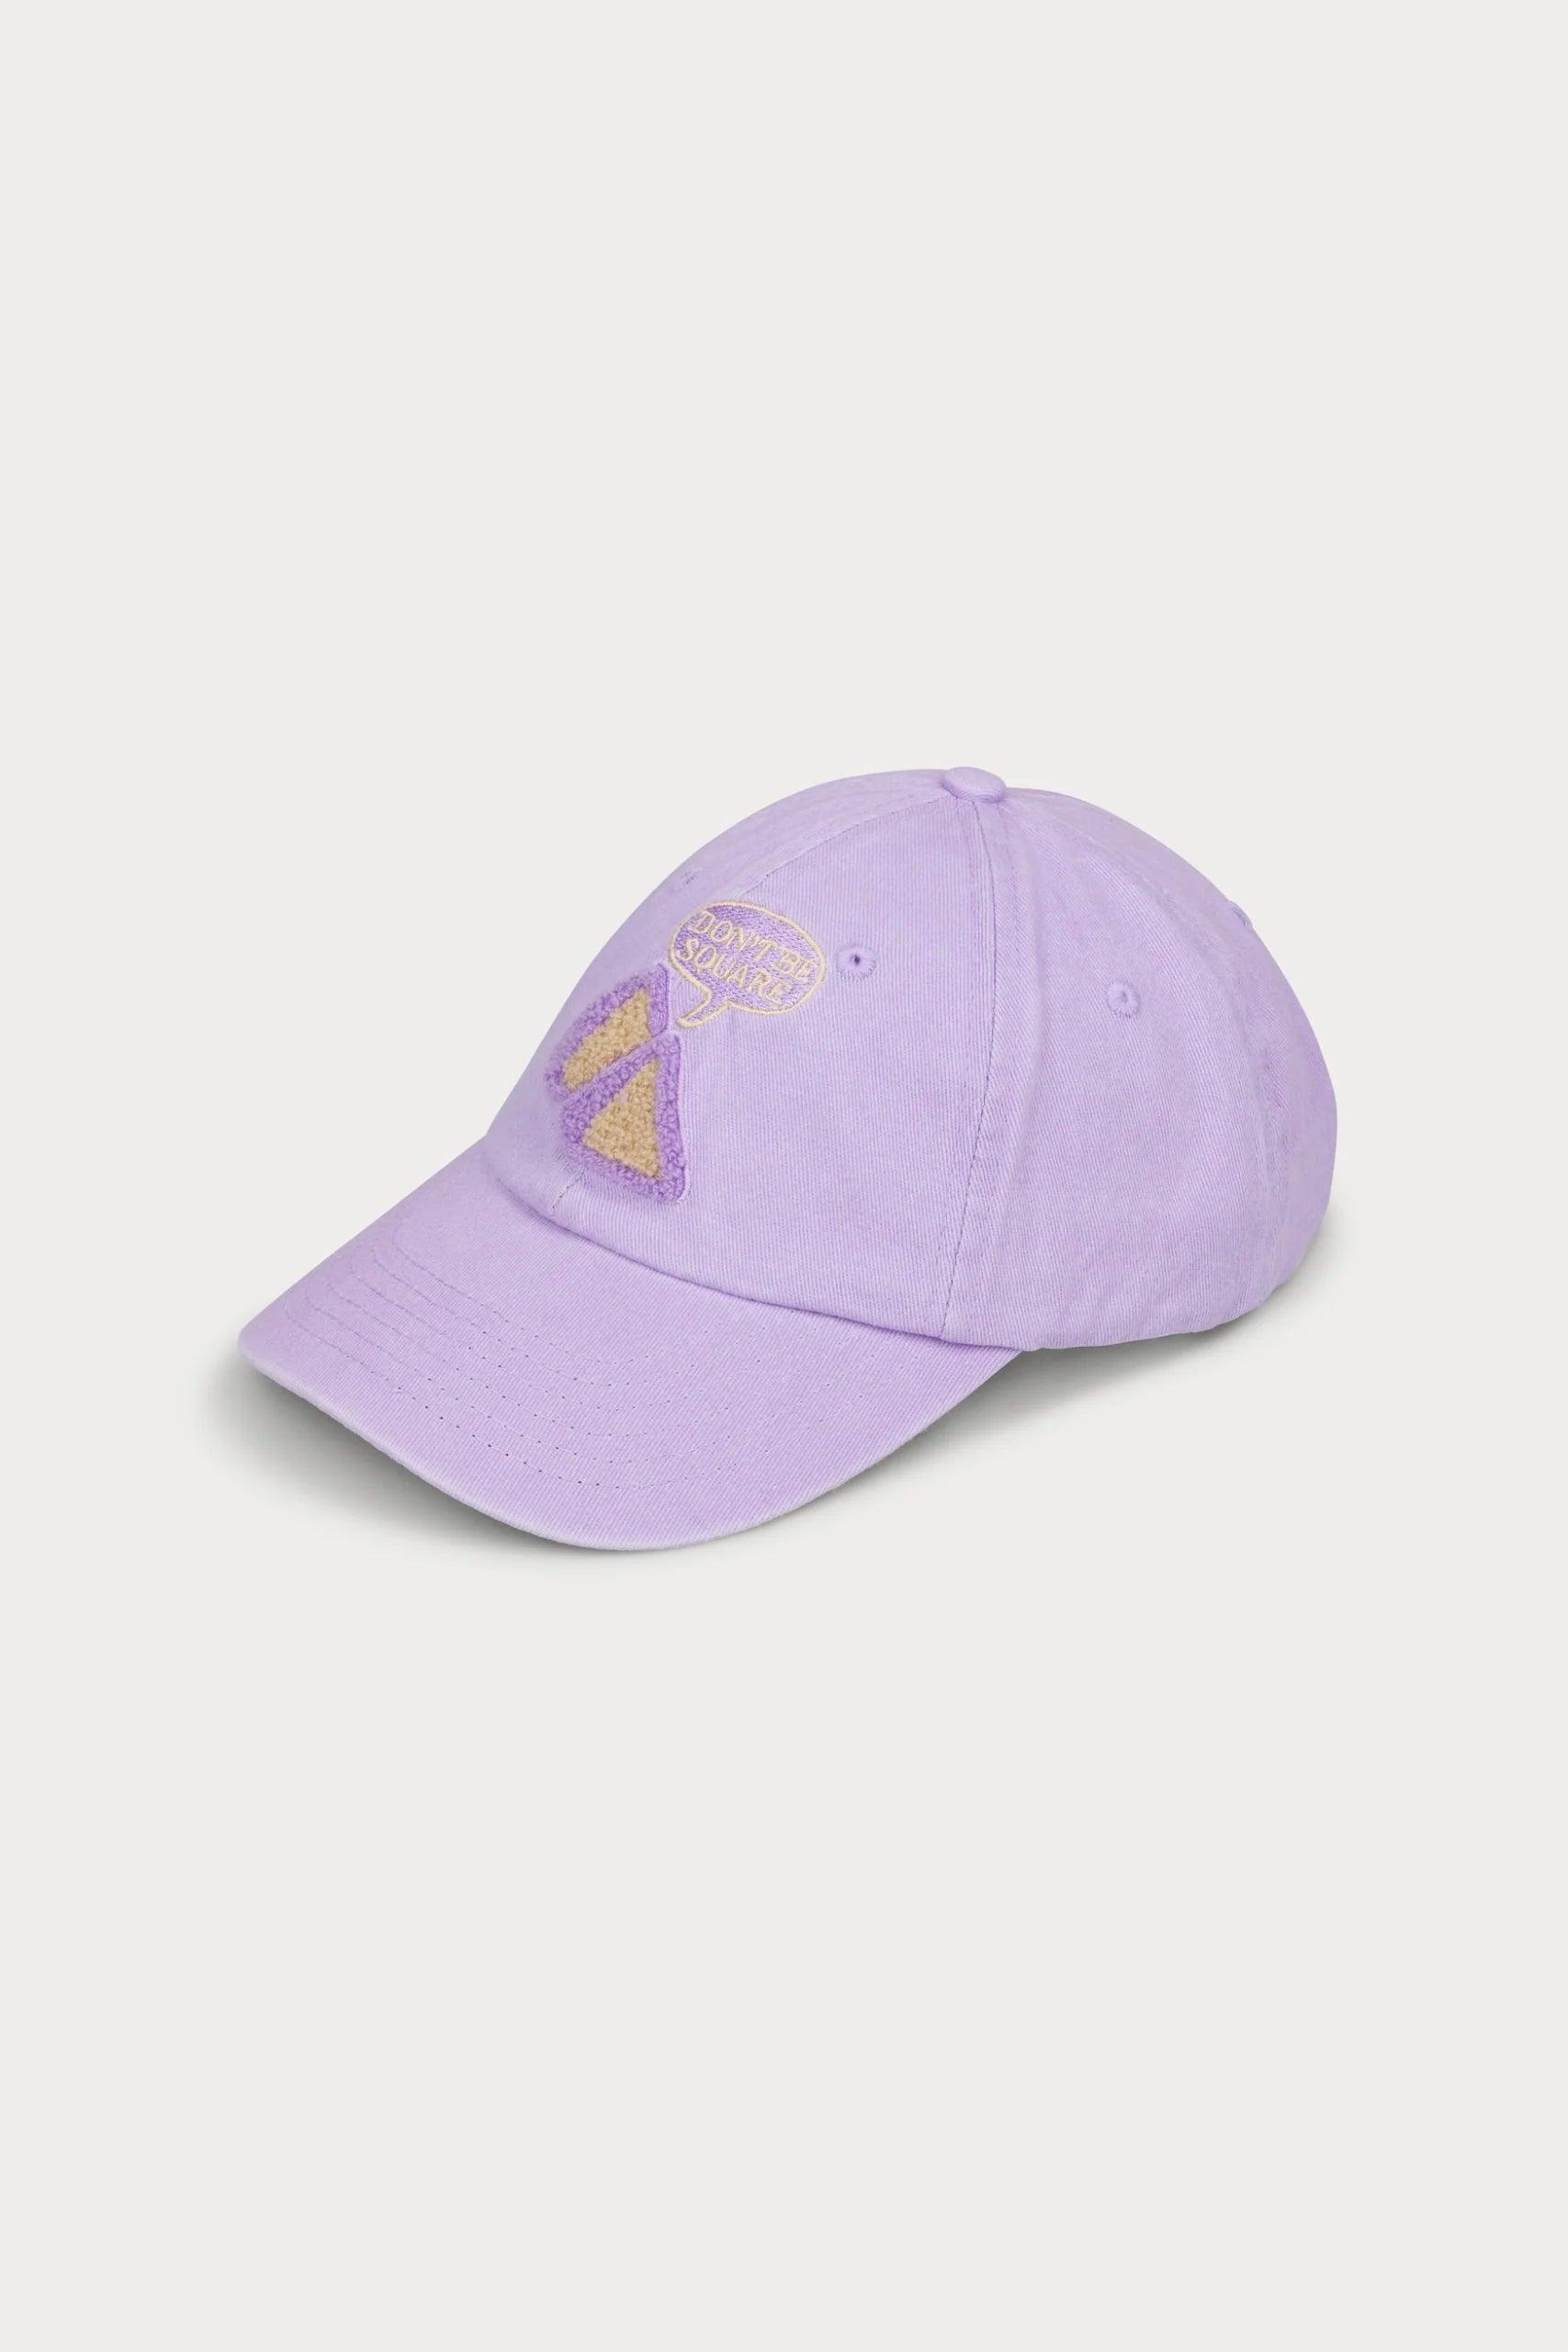 Aries Arise Don’t Be Square Cap - Lilac - One size - Hat